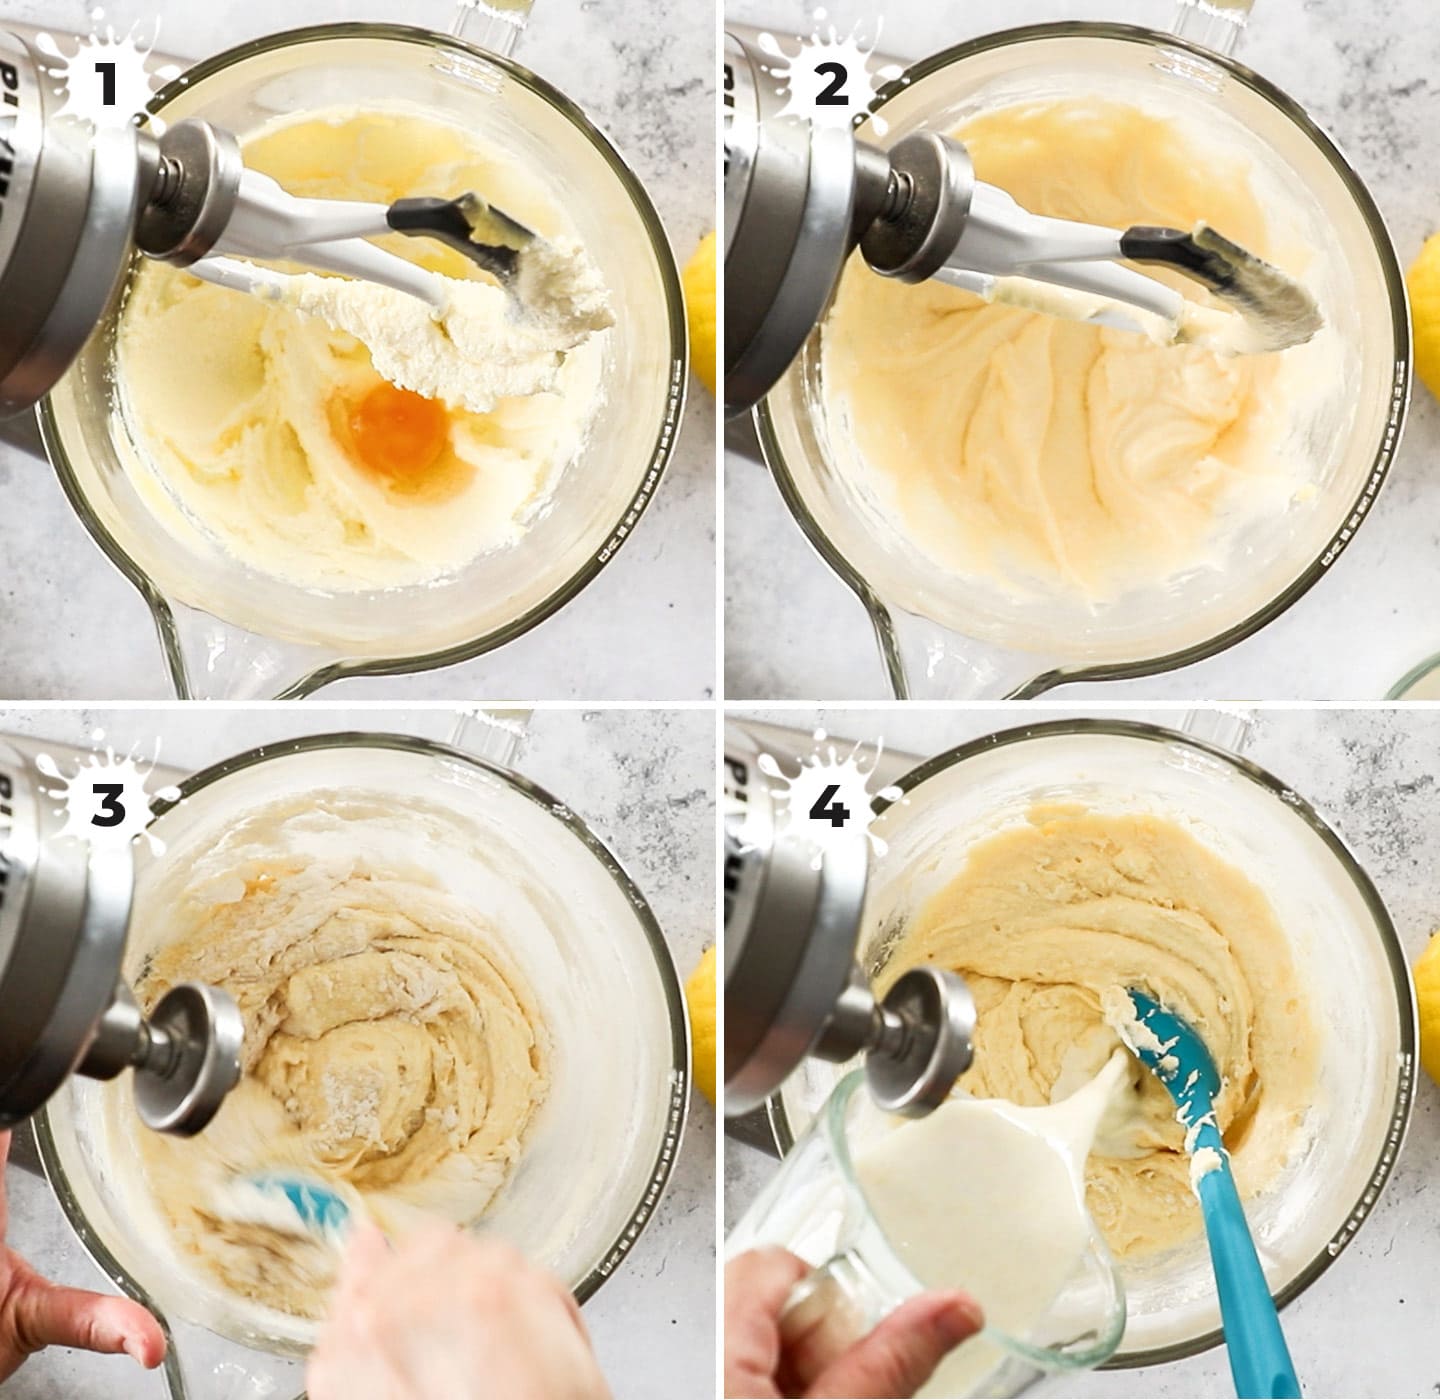 A collage showing how to mix the cake batter.